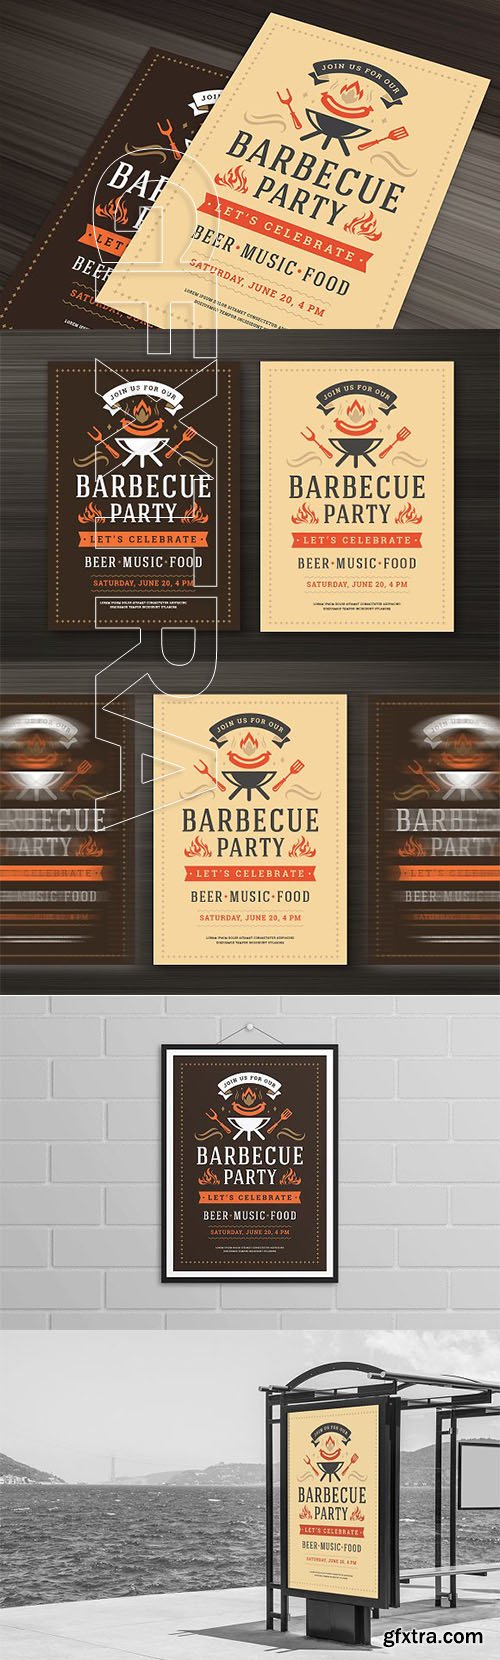 CreativeMarket - Barbecue Party Flyer Template 2634596